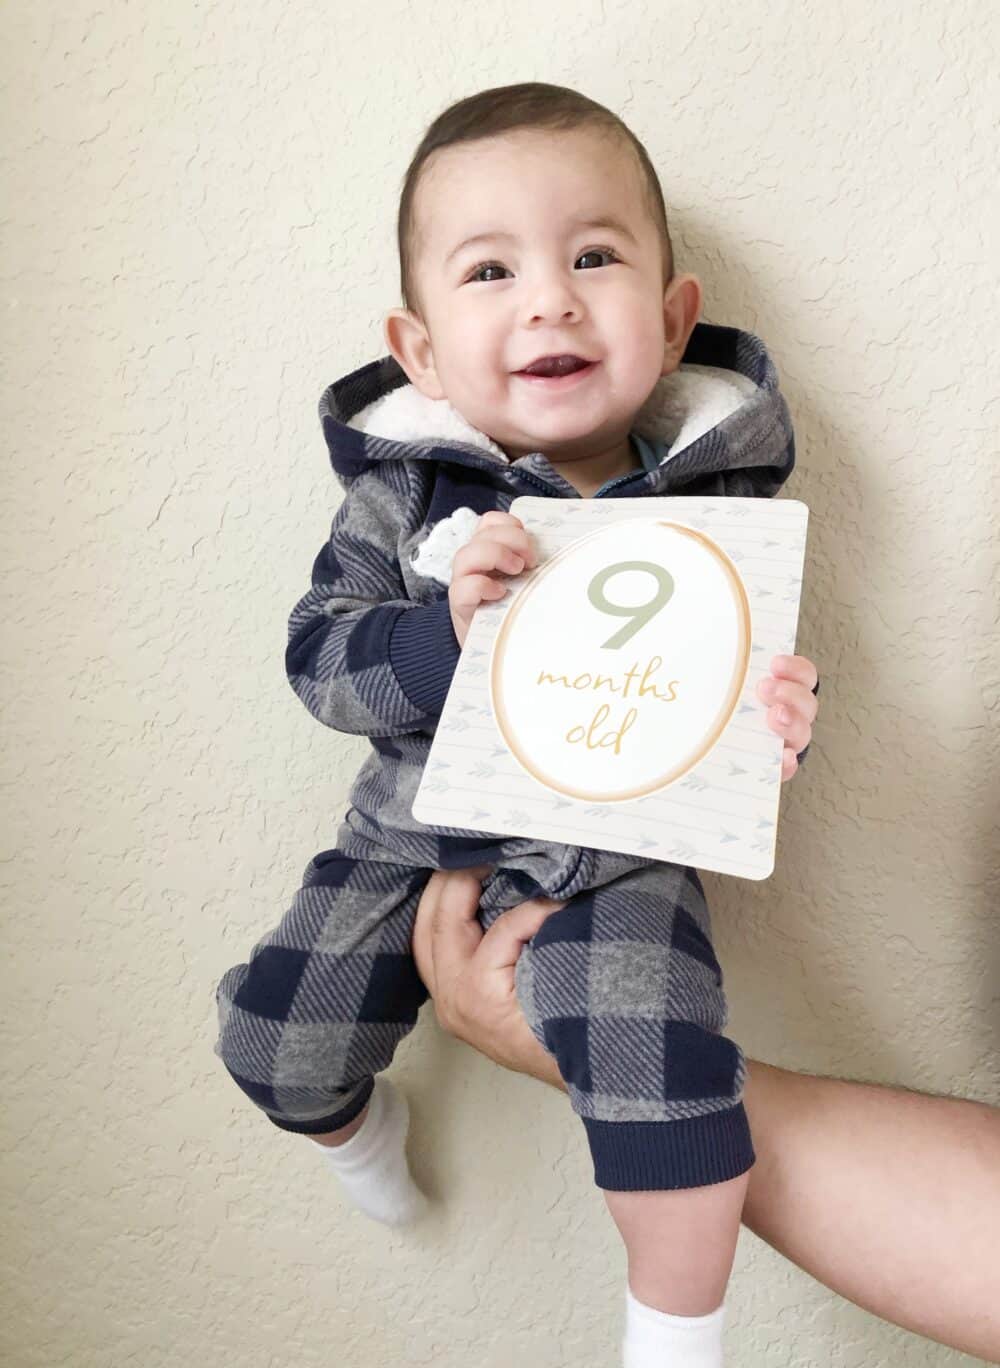 A baby is holding up a sign with the number 9 on it.